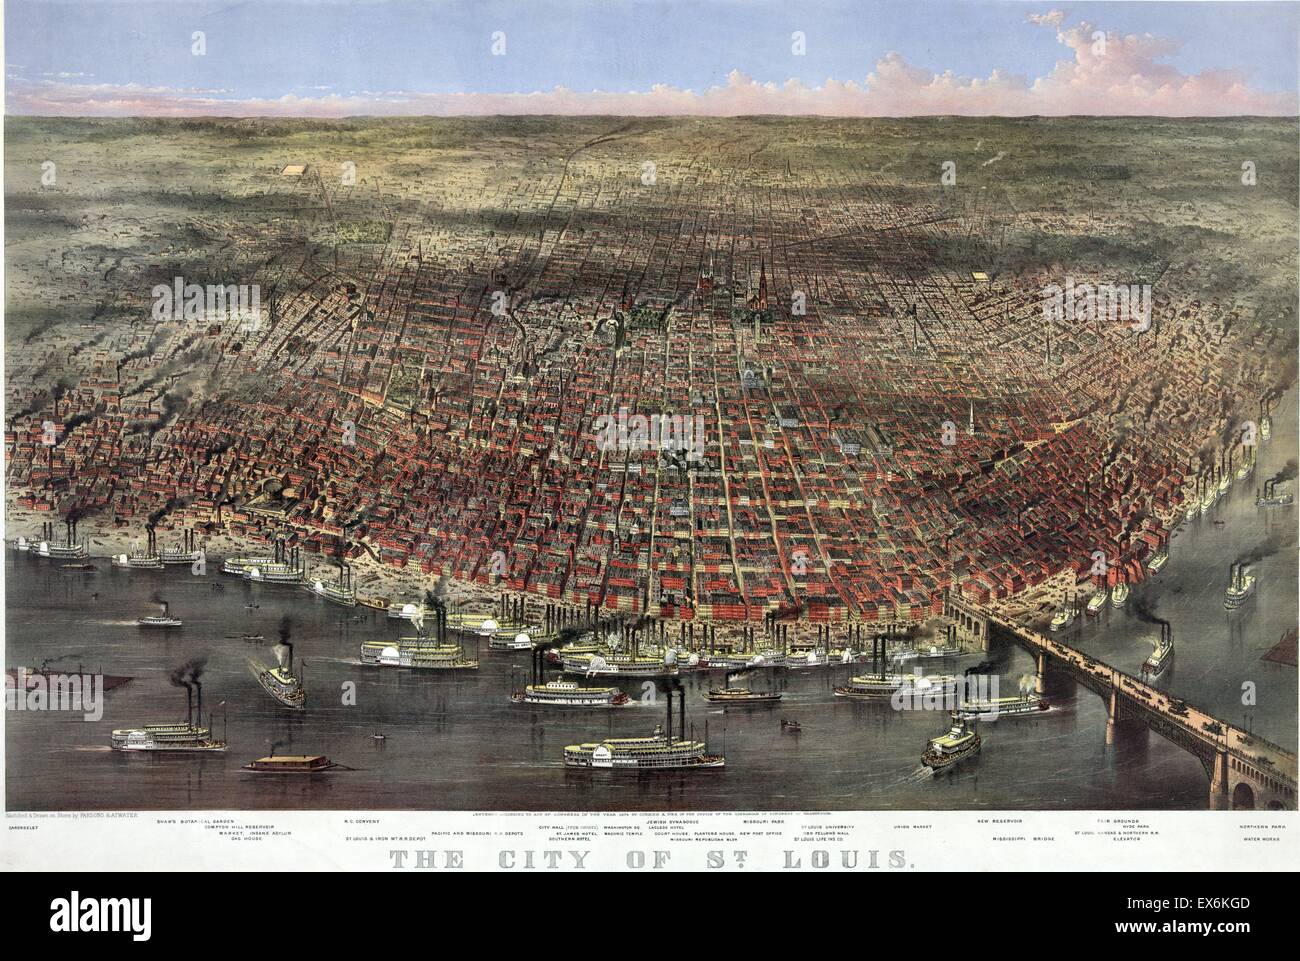 Colour sketch of the city of St Louis from a bird's eye view. Depicted in the sketch is the city of St Louis, Missouri and the Mississippi River. Dated 1874 Stock Photo